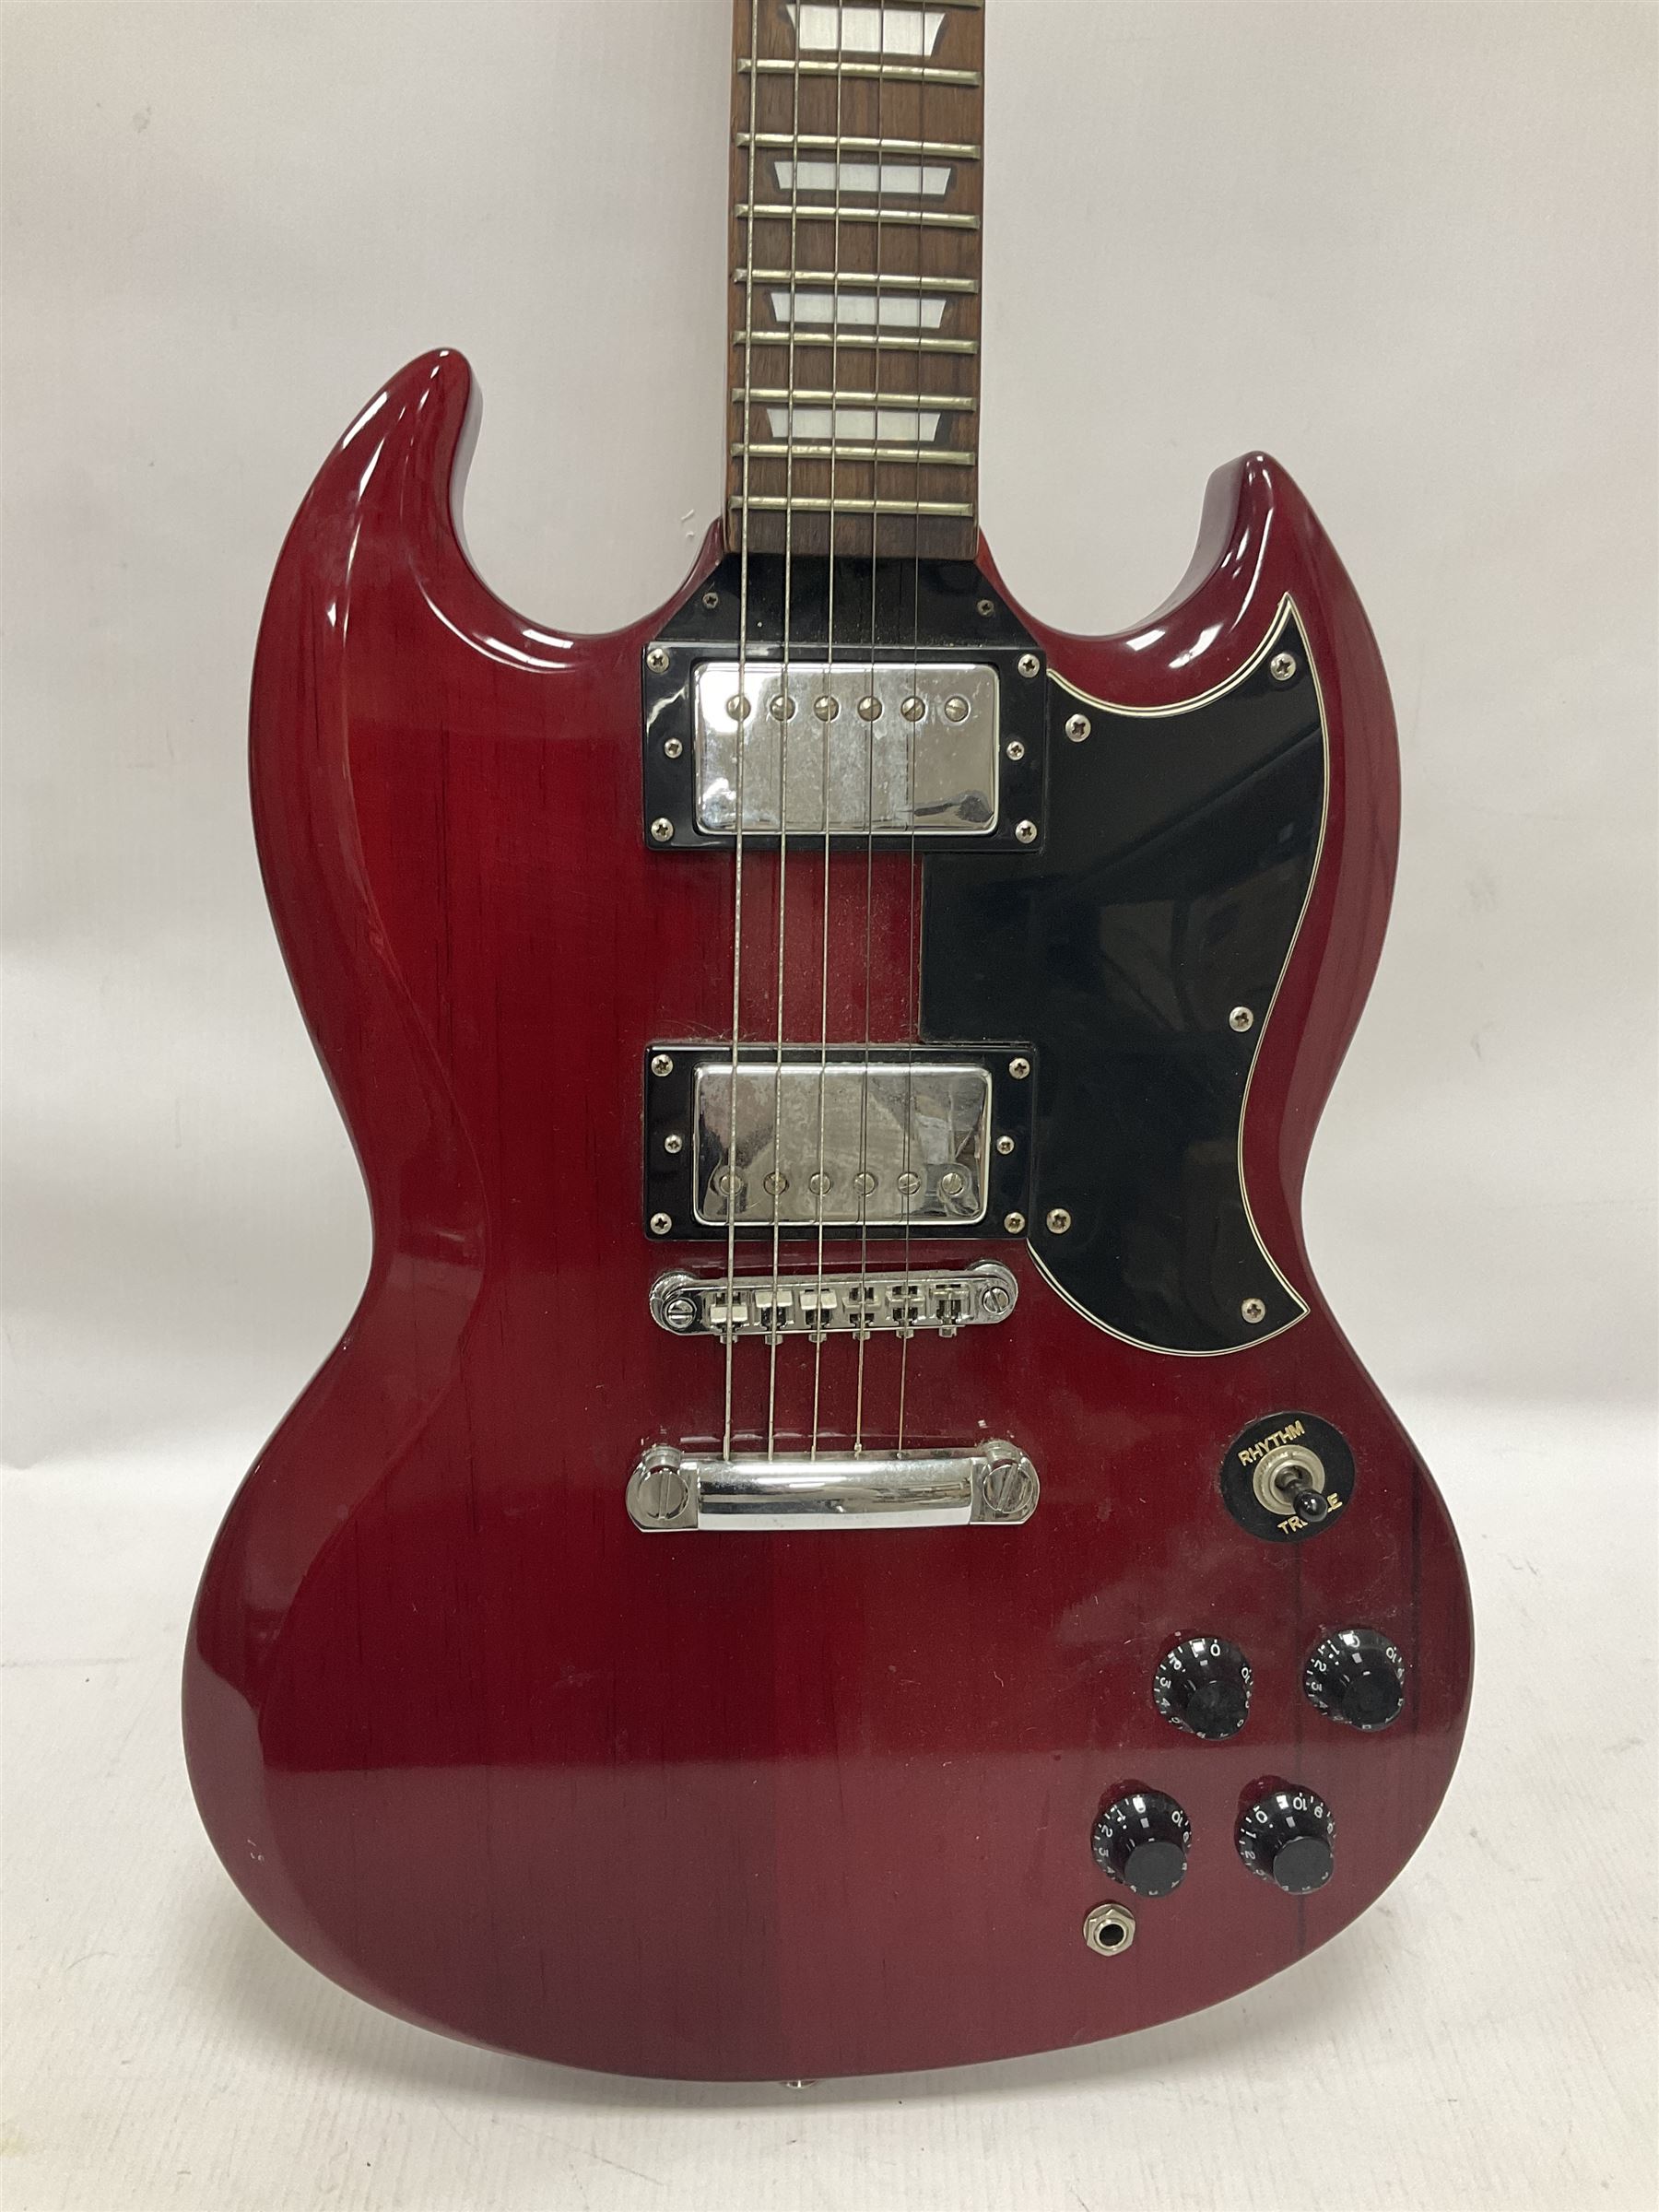 Vintage VS6M Reissued Series six string electric guitar - Image 3 of 19